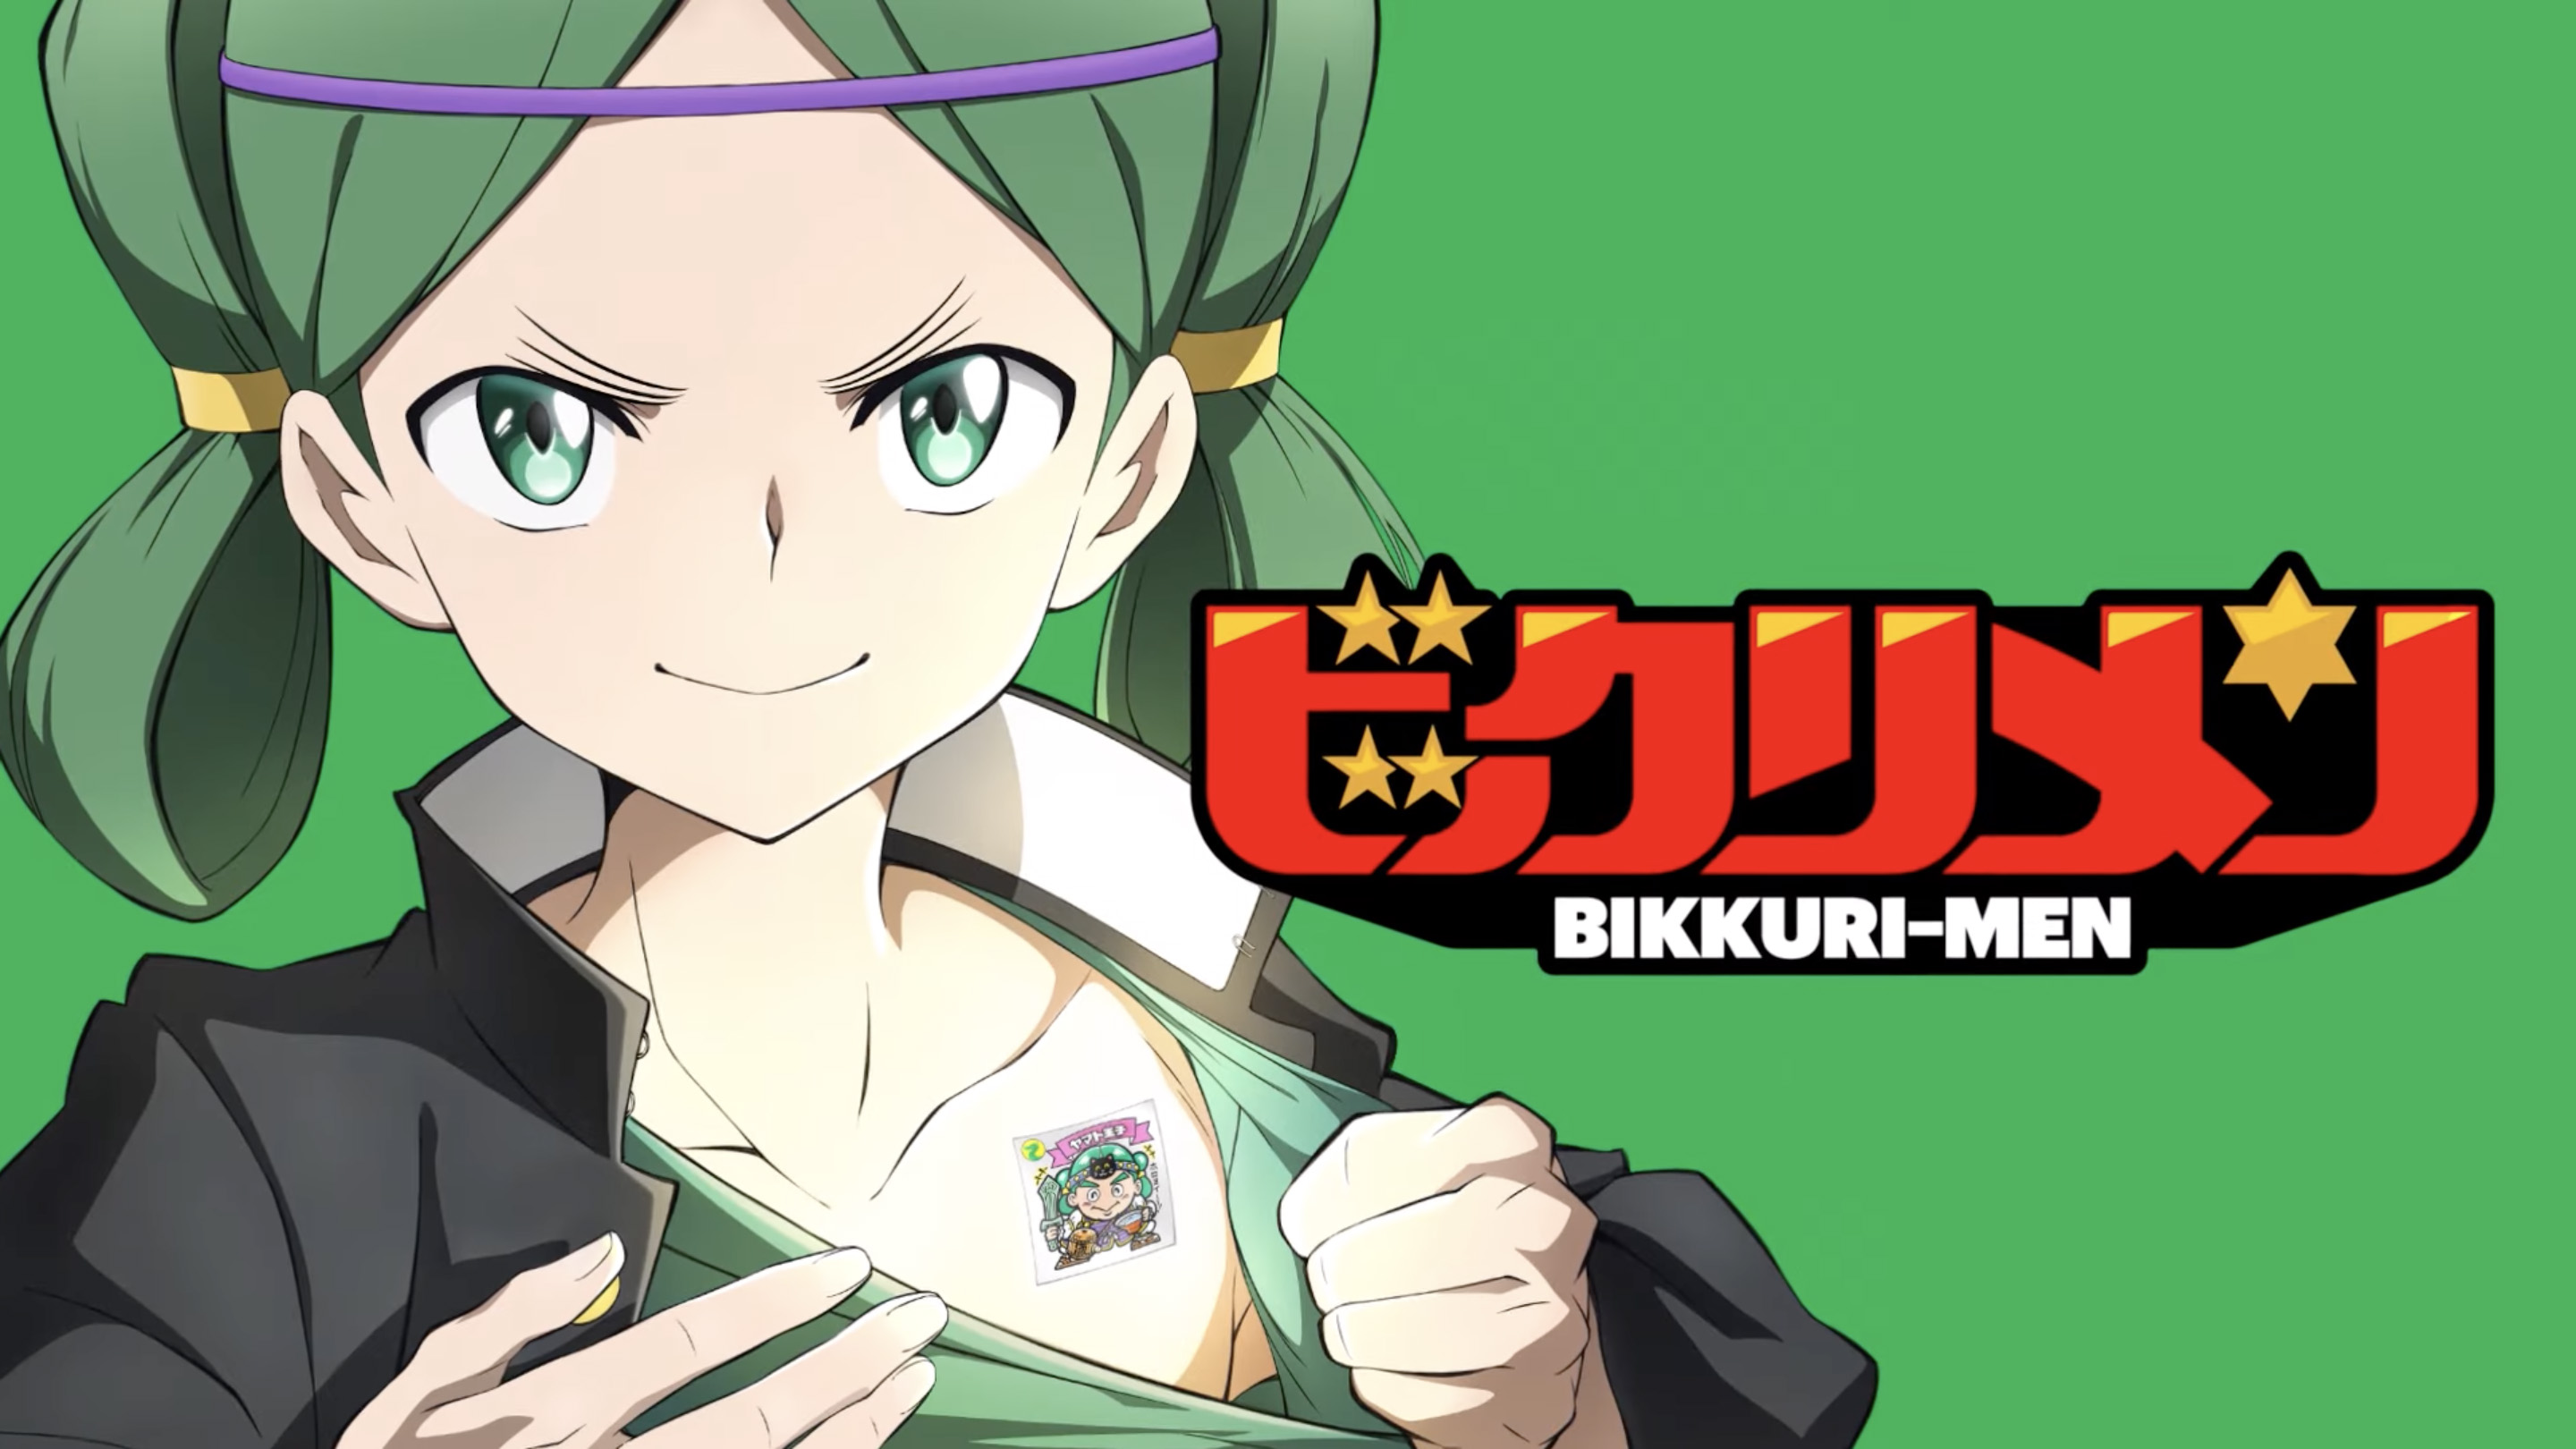 A promotional image for the upcoming Bikkurimen TV anime featuring the main character, Yamato, revealing his personal Bikkuriman sticker, which is stuck to his collar bone beneath his school uniform.